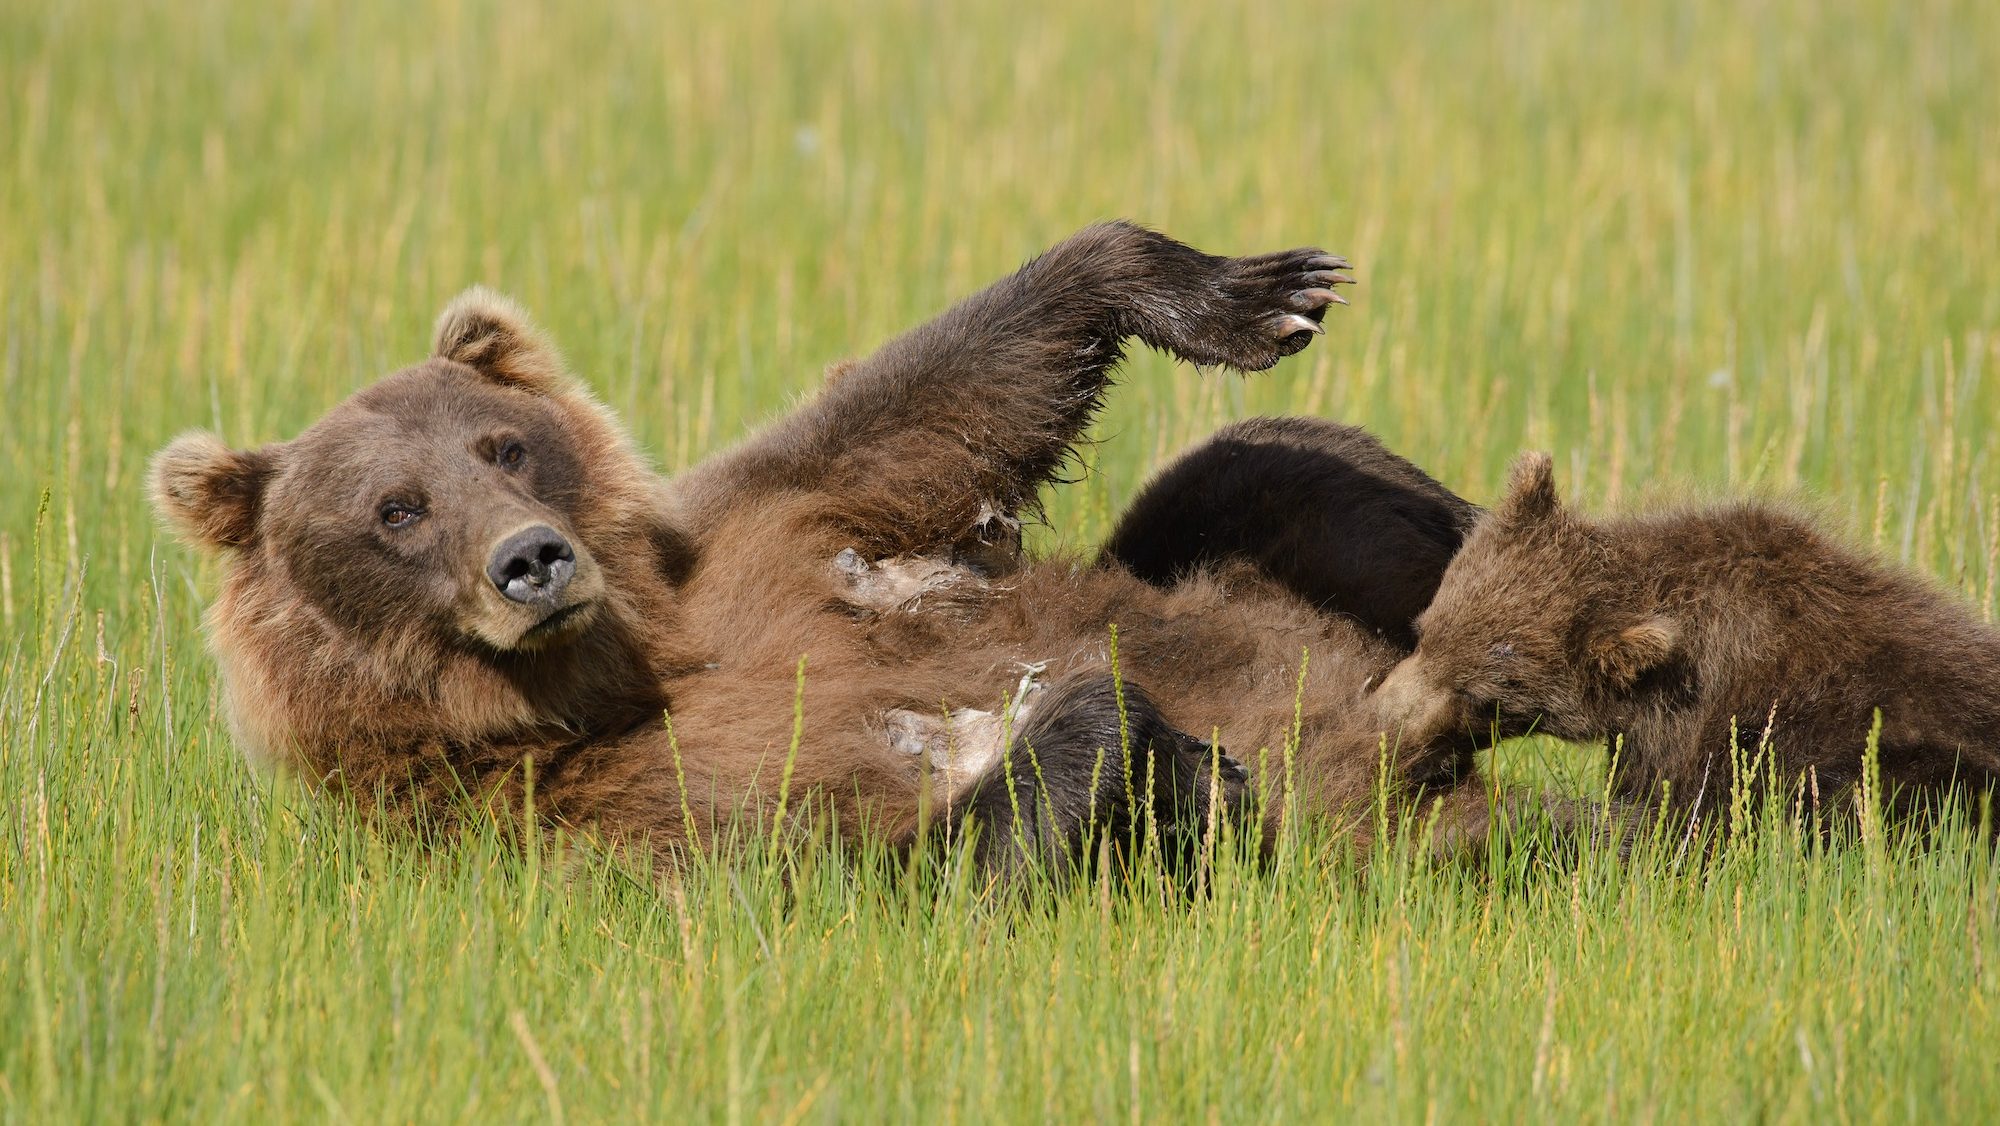 female bear on her back with her cub nursing on her belly